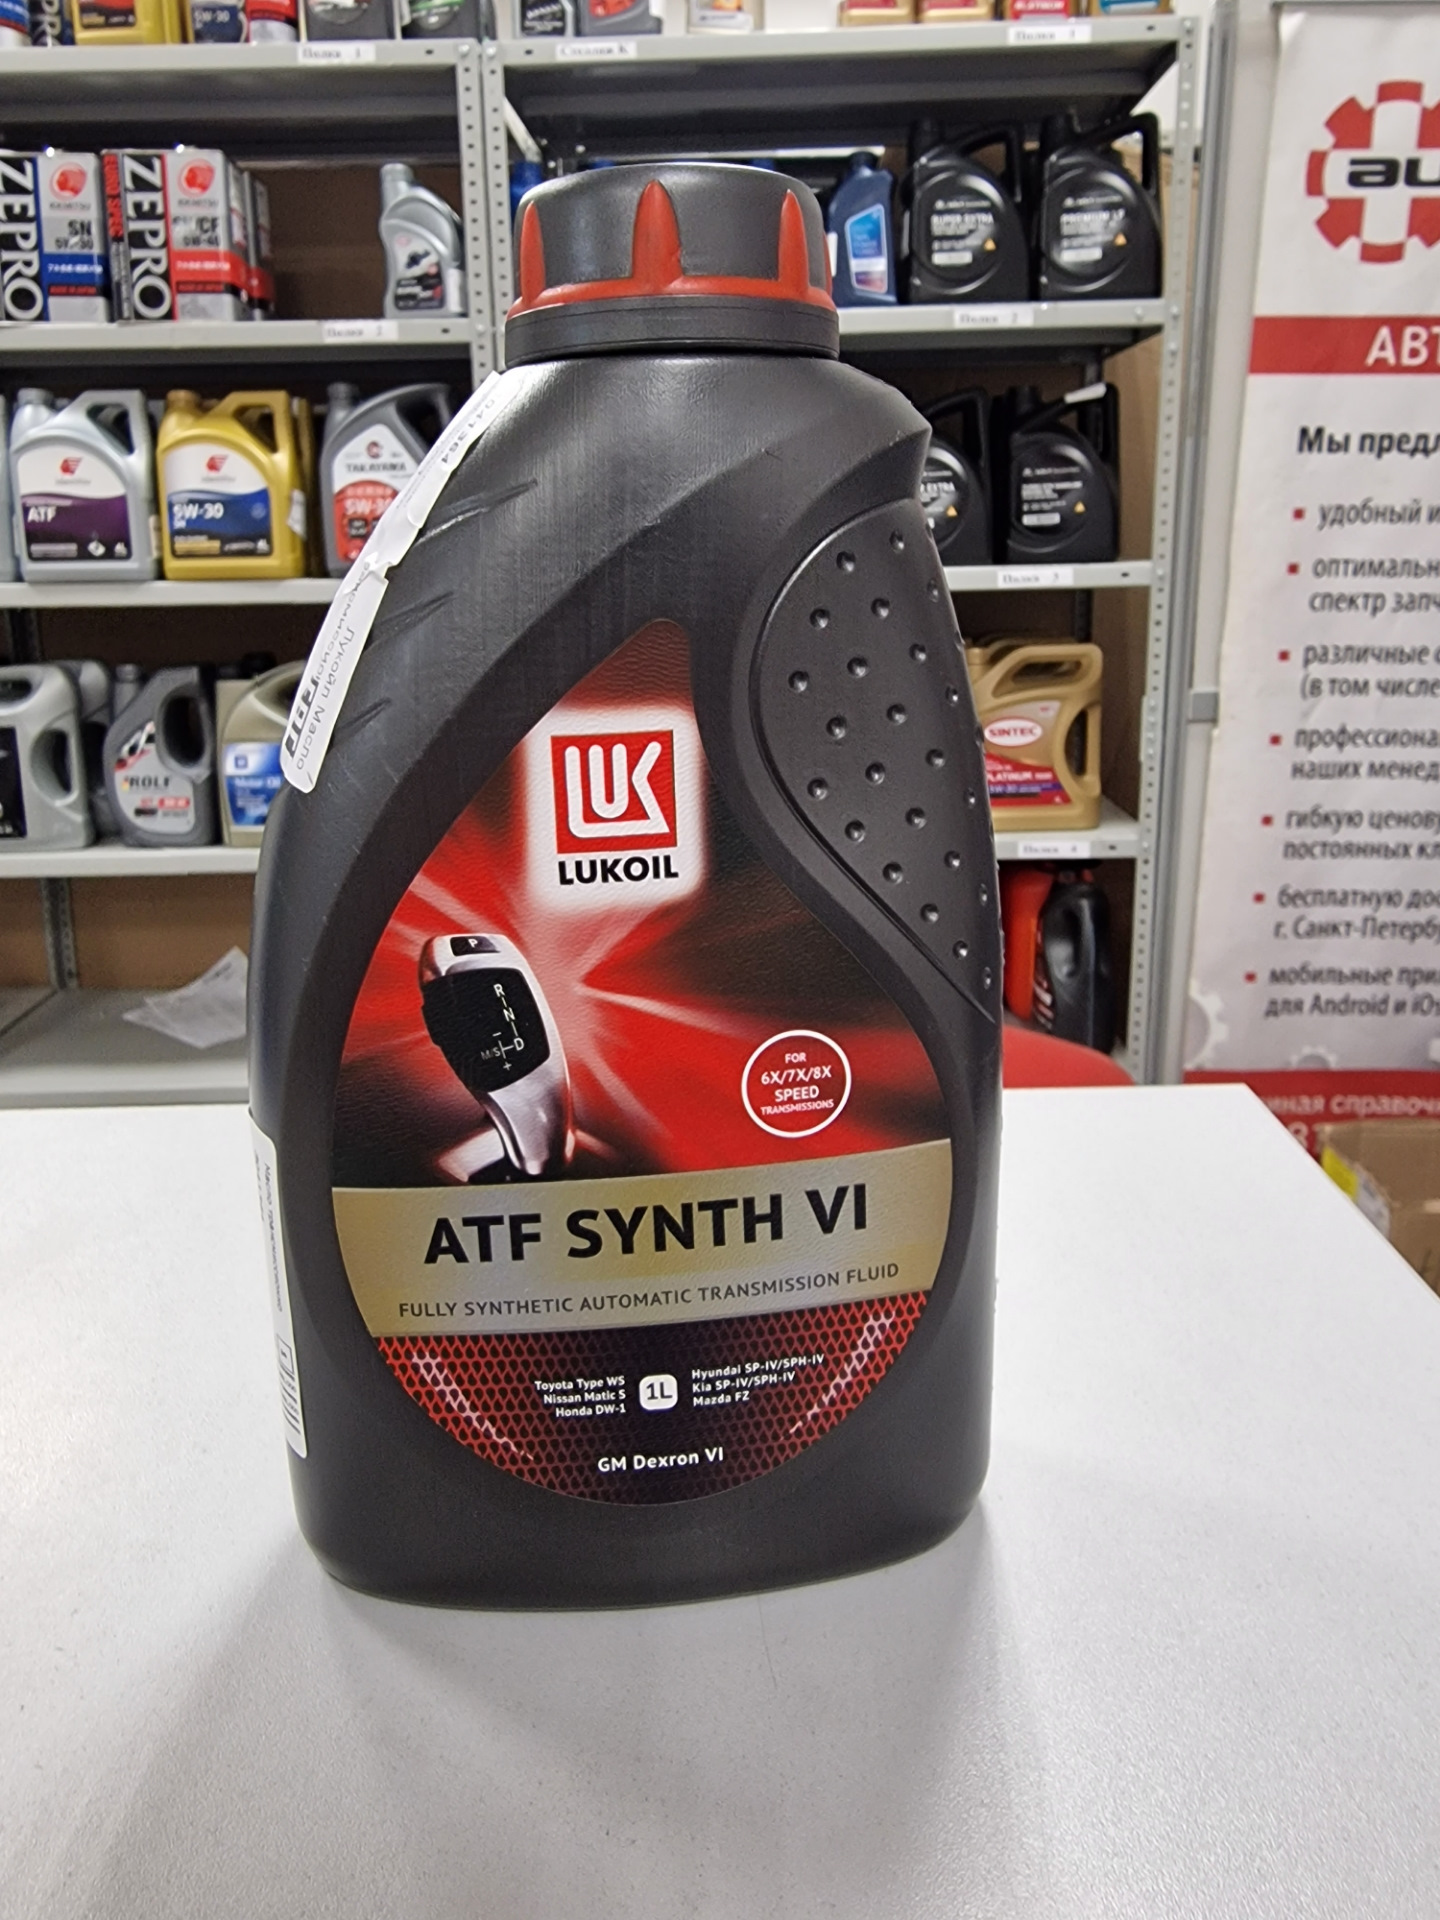 Масло лукойл atf synth. ATF SP-IV Lukoil. Lukoil ATF Synth vi. Лукойл ATF Synth lv. ZIC ATF Synth vi.